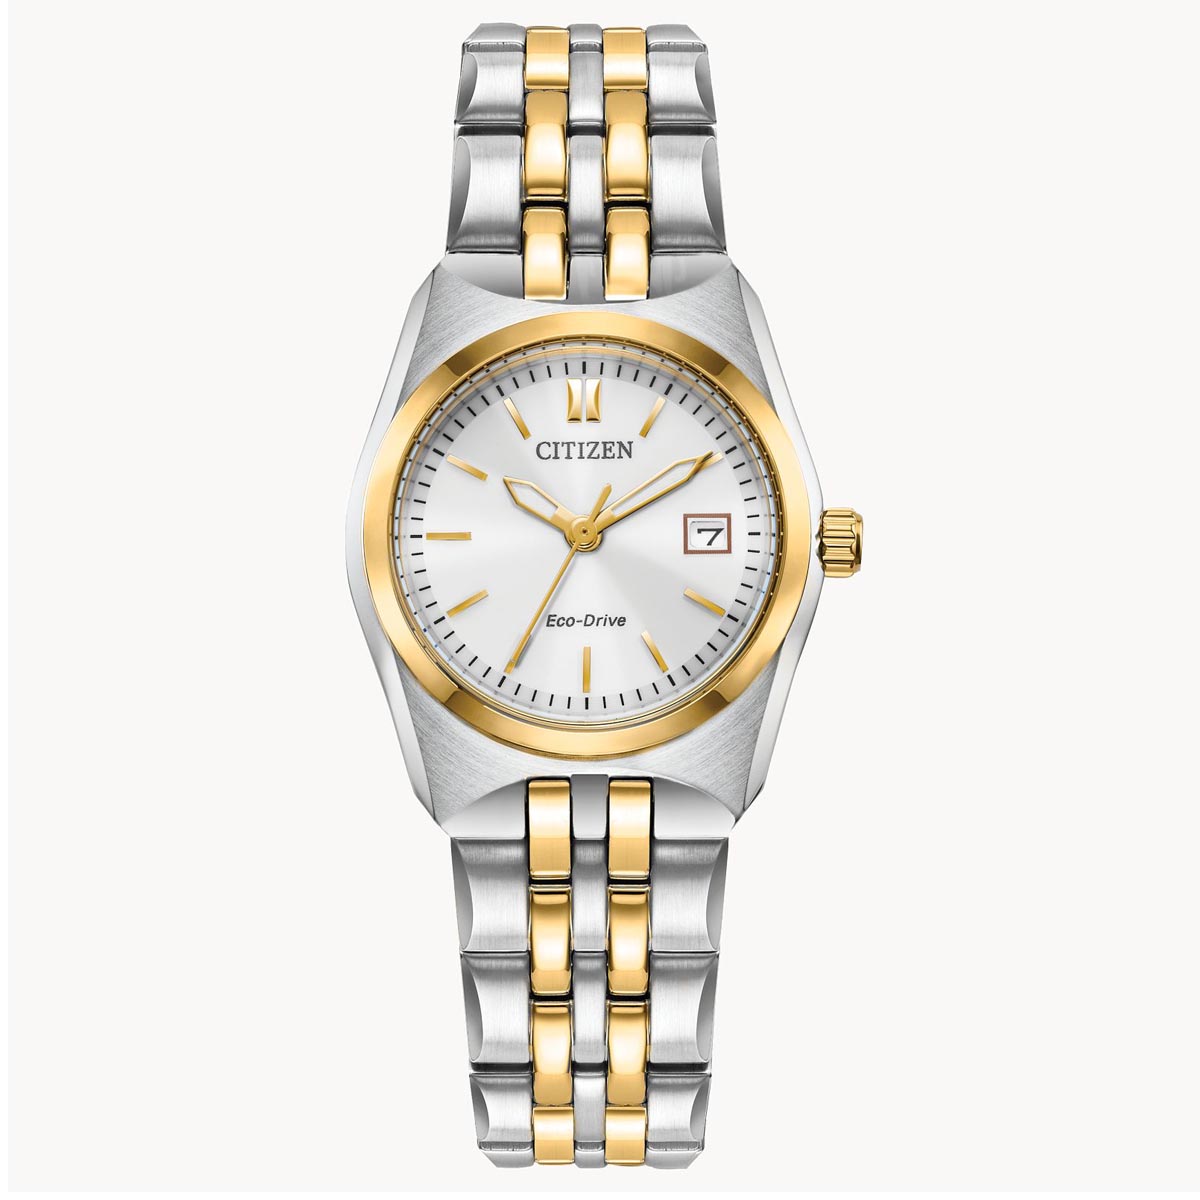 Citizen Corso Womens Watch with White Dial and Stainless Steel and Yellow Gold Toned Bracelet (eco drive movement)